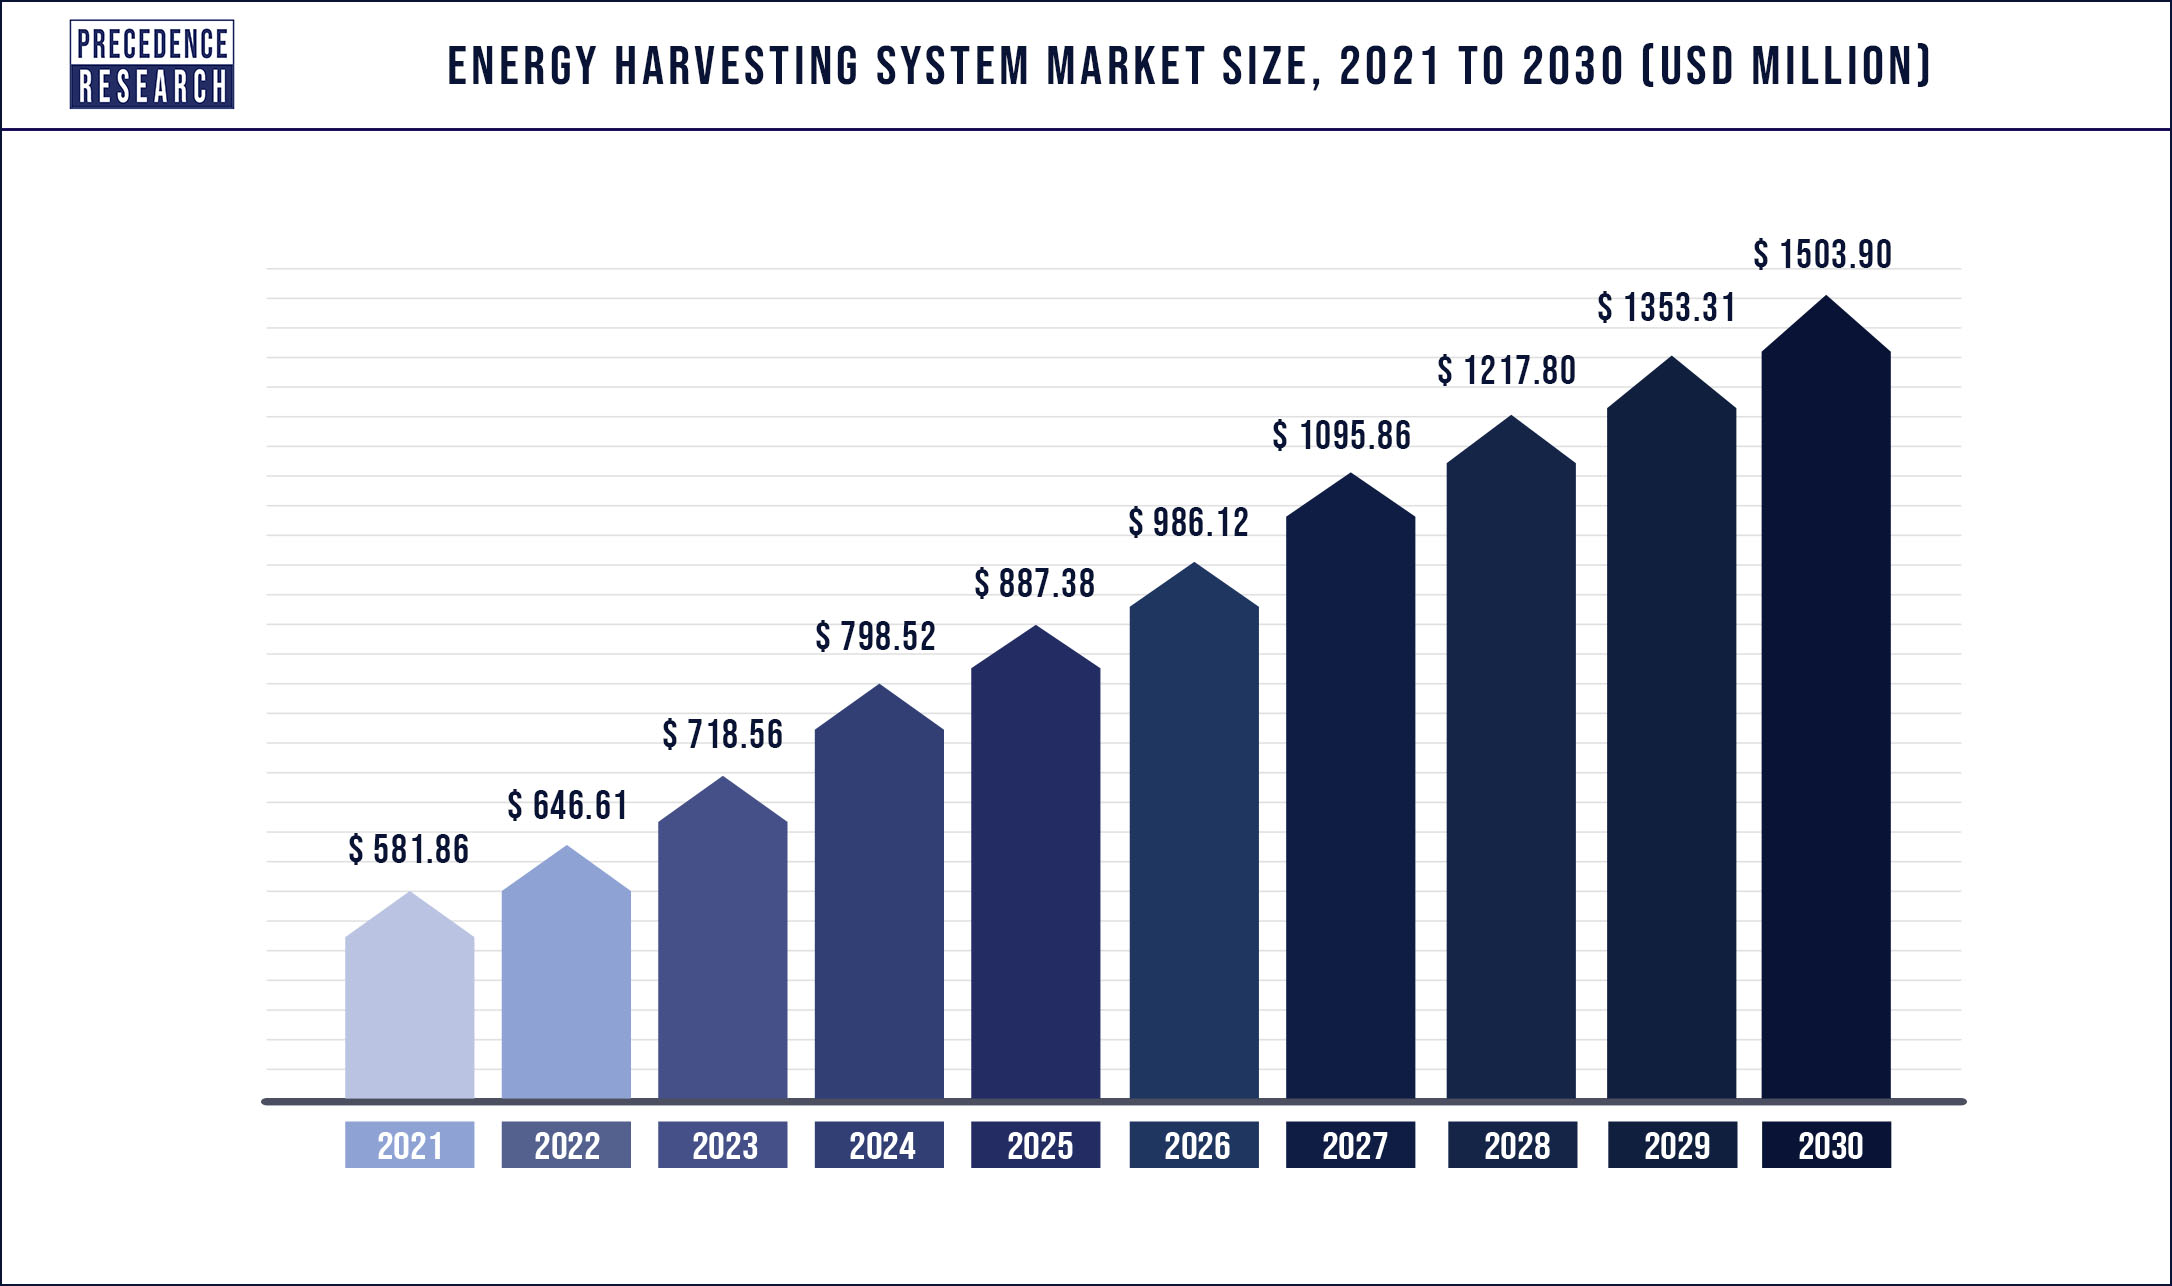 Energy Harvesting System Market Size will Reach USD 1,503.9 million by 2030